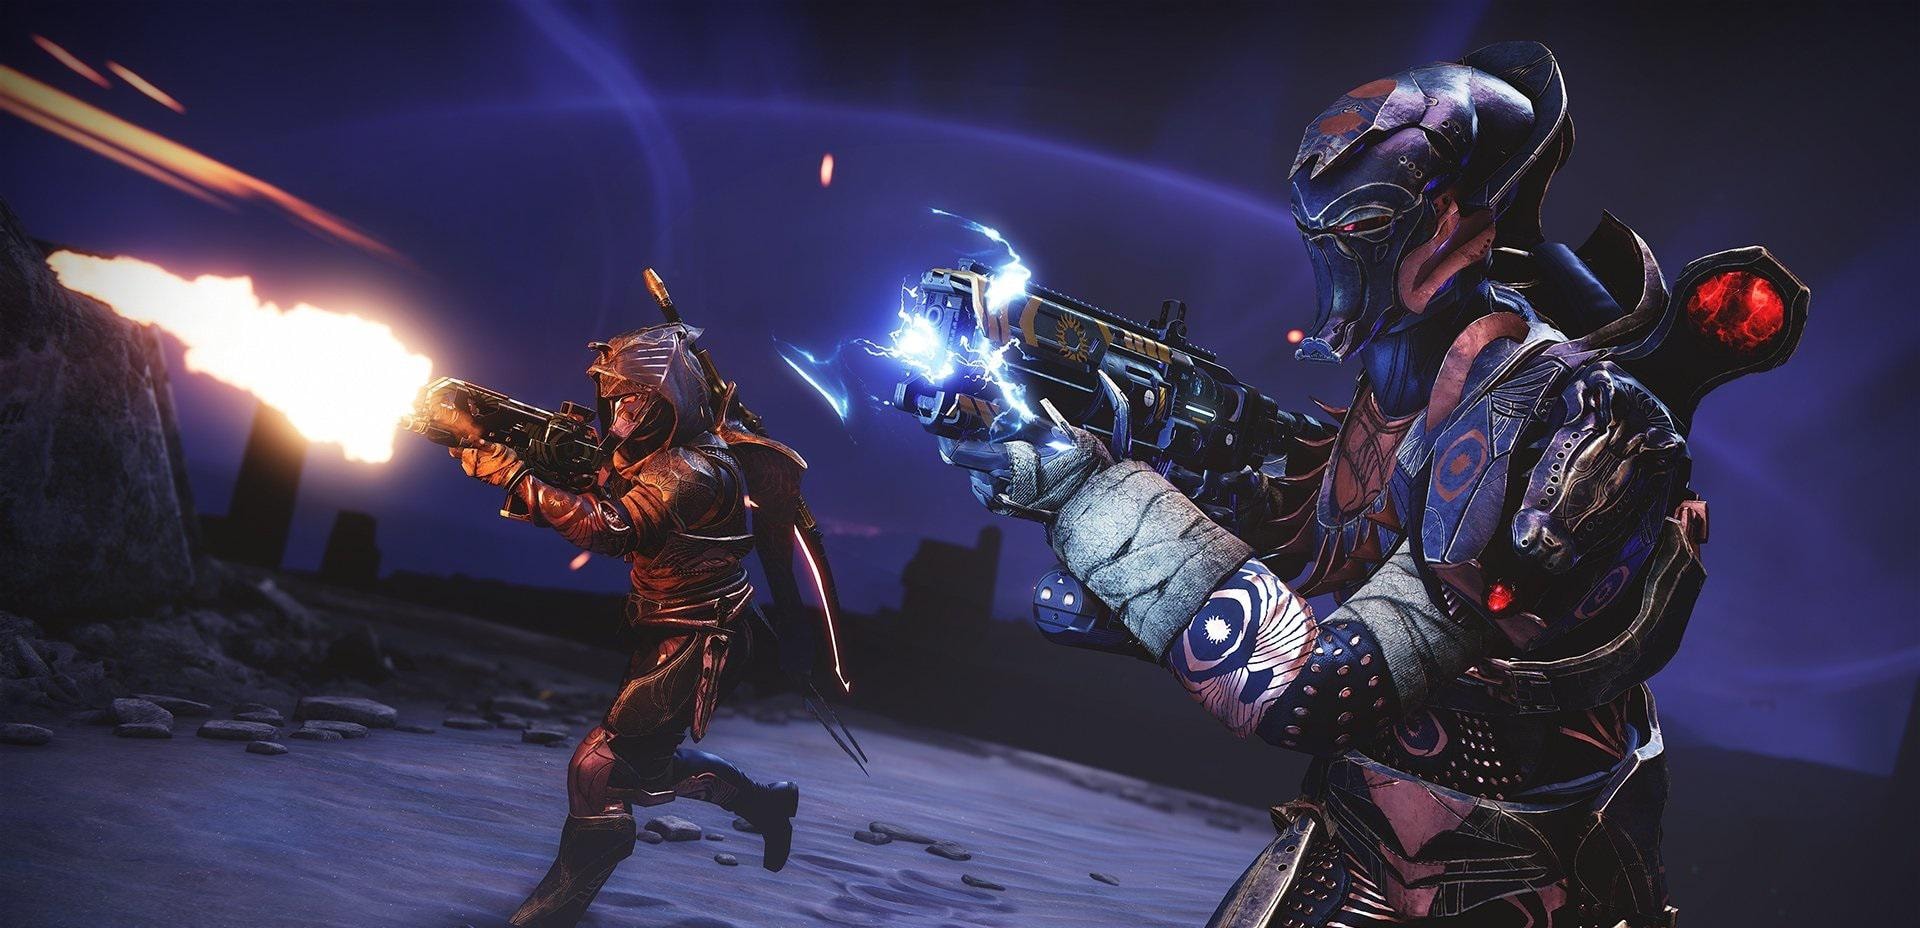 take-on-destiny-2s-trials-of-osiris-solo-this-weekend-with-new-freelance-queue